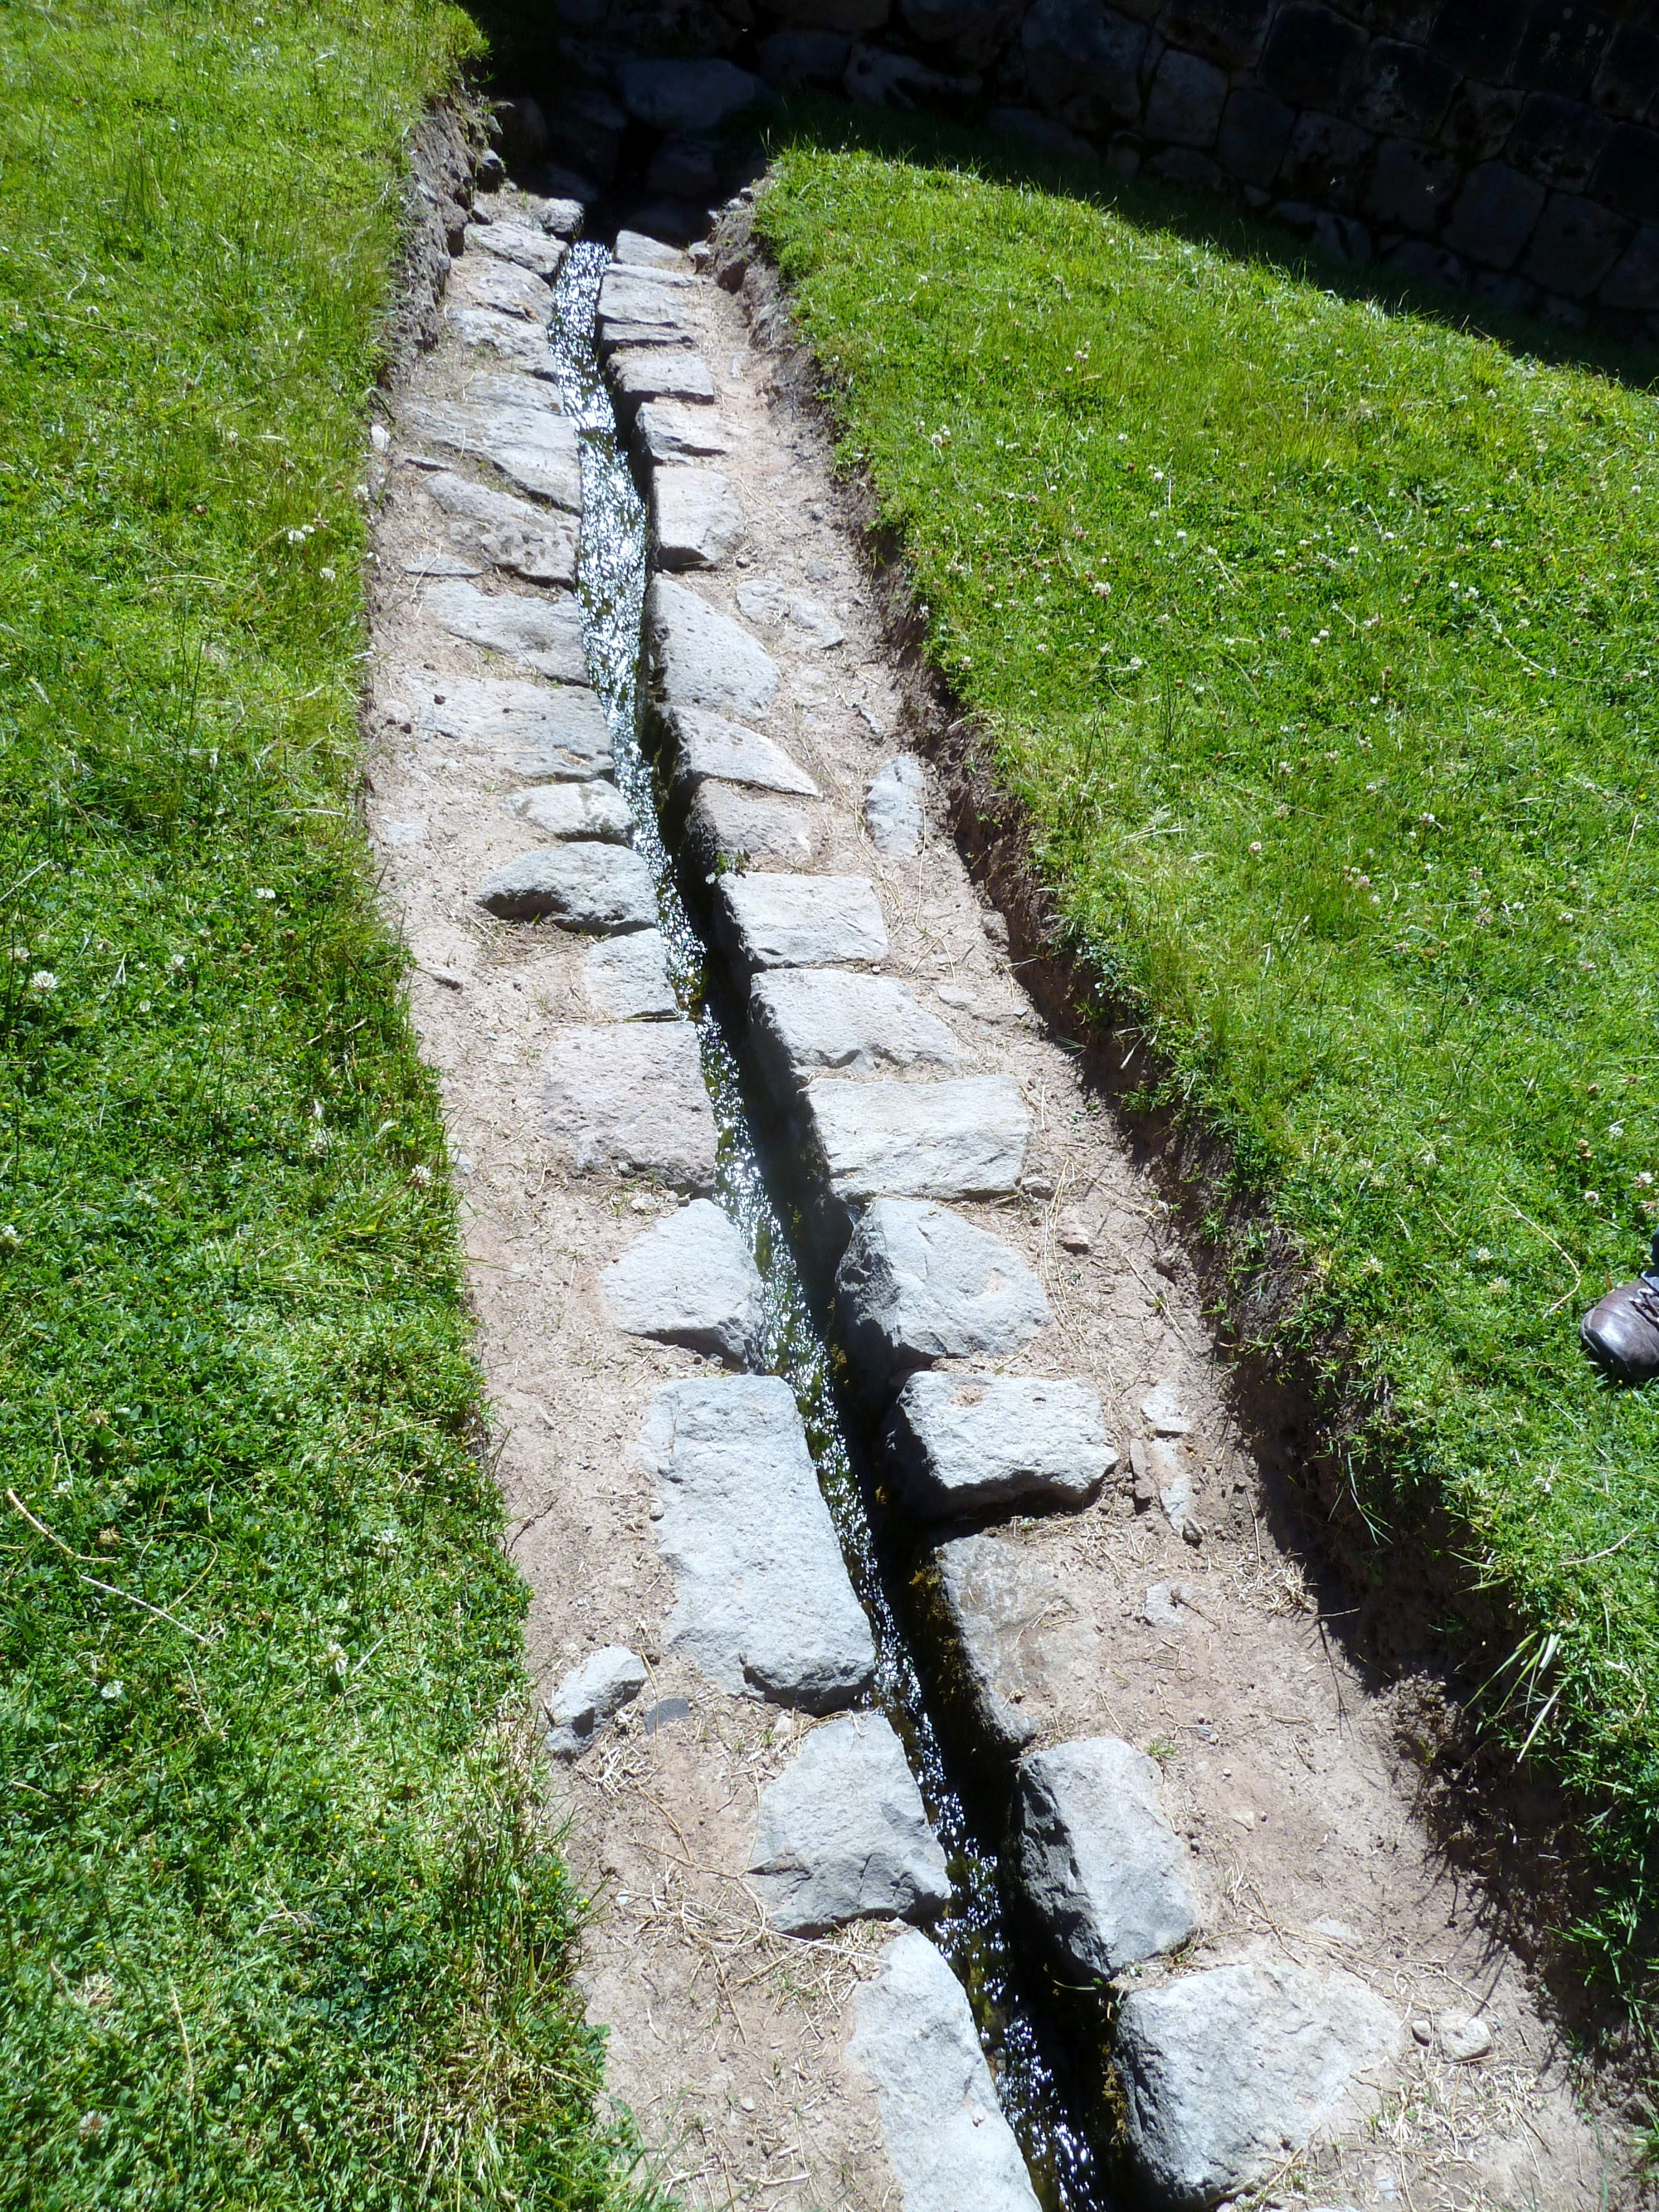 The irrigation system based on canals, fountains and stonework with water drop structures shows that the Incas had an advanced water related technology and were experienced hydraulic engineers